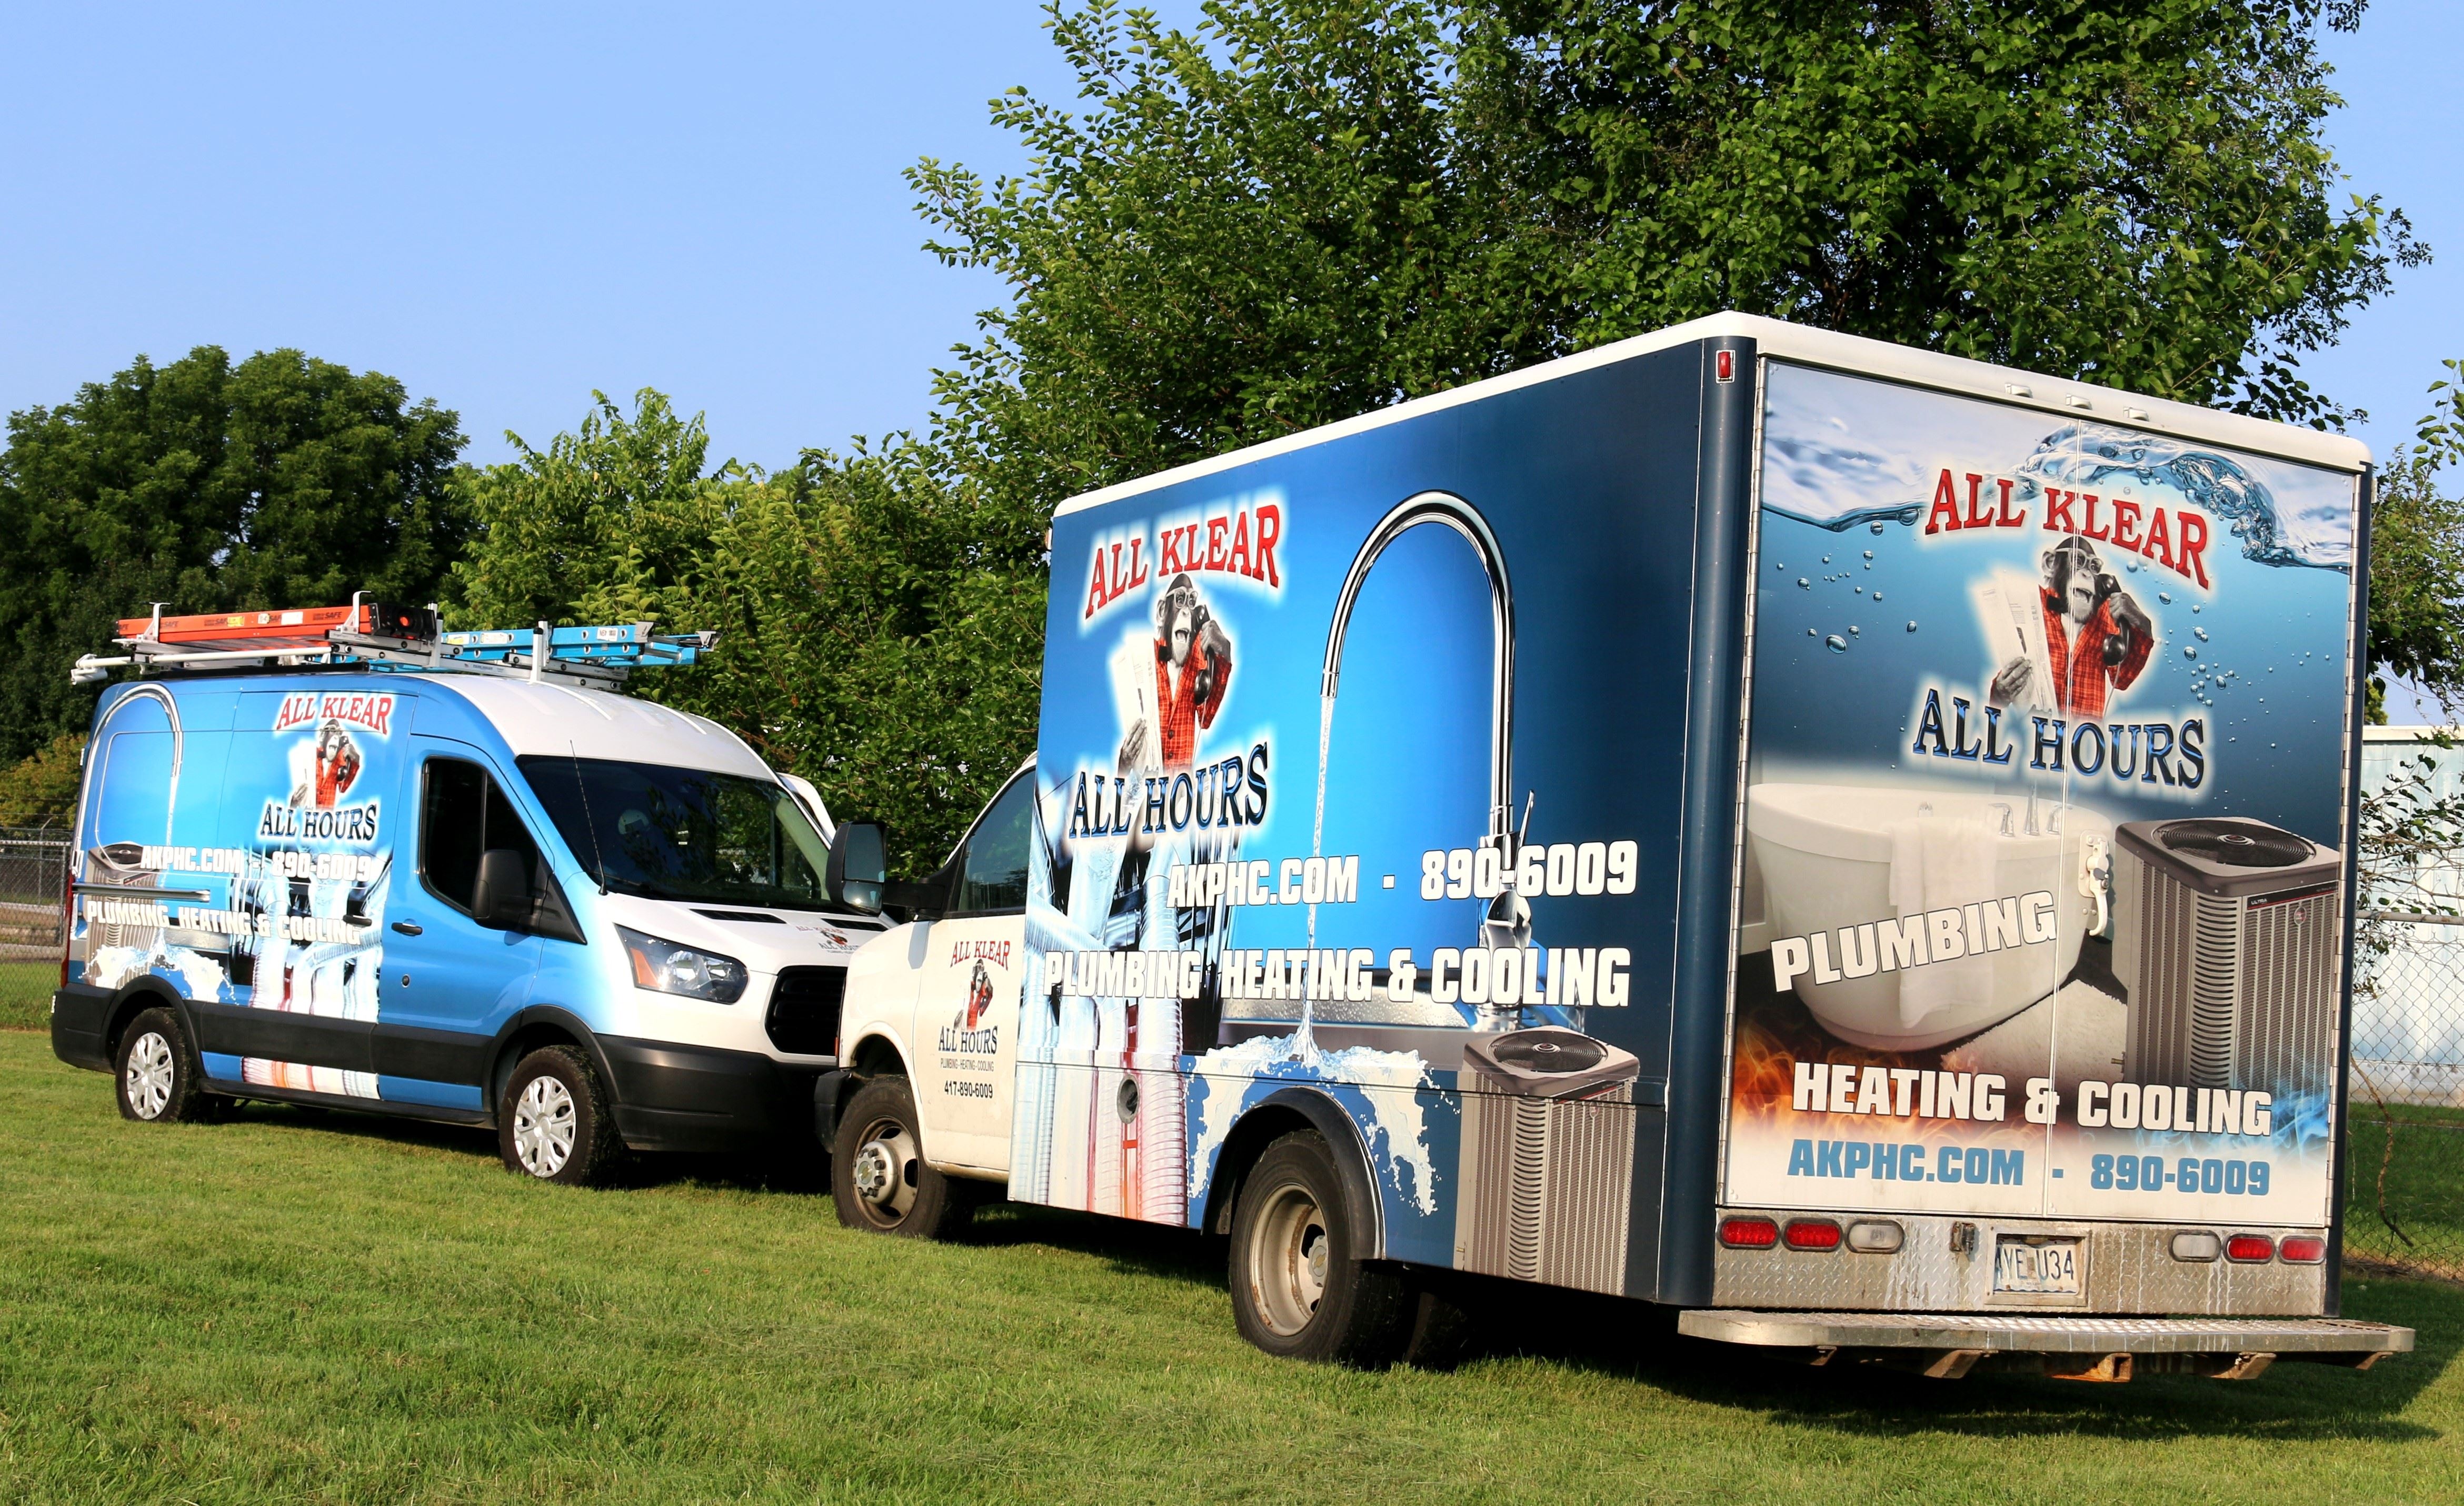 All Klear, Plumbing, Heating and Cooling Trucks facing each other